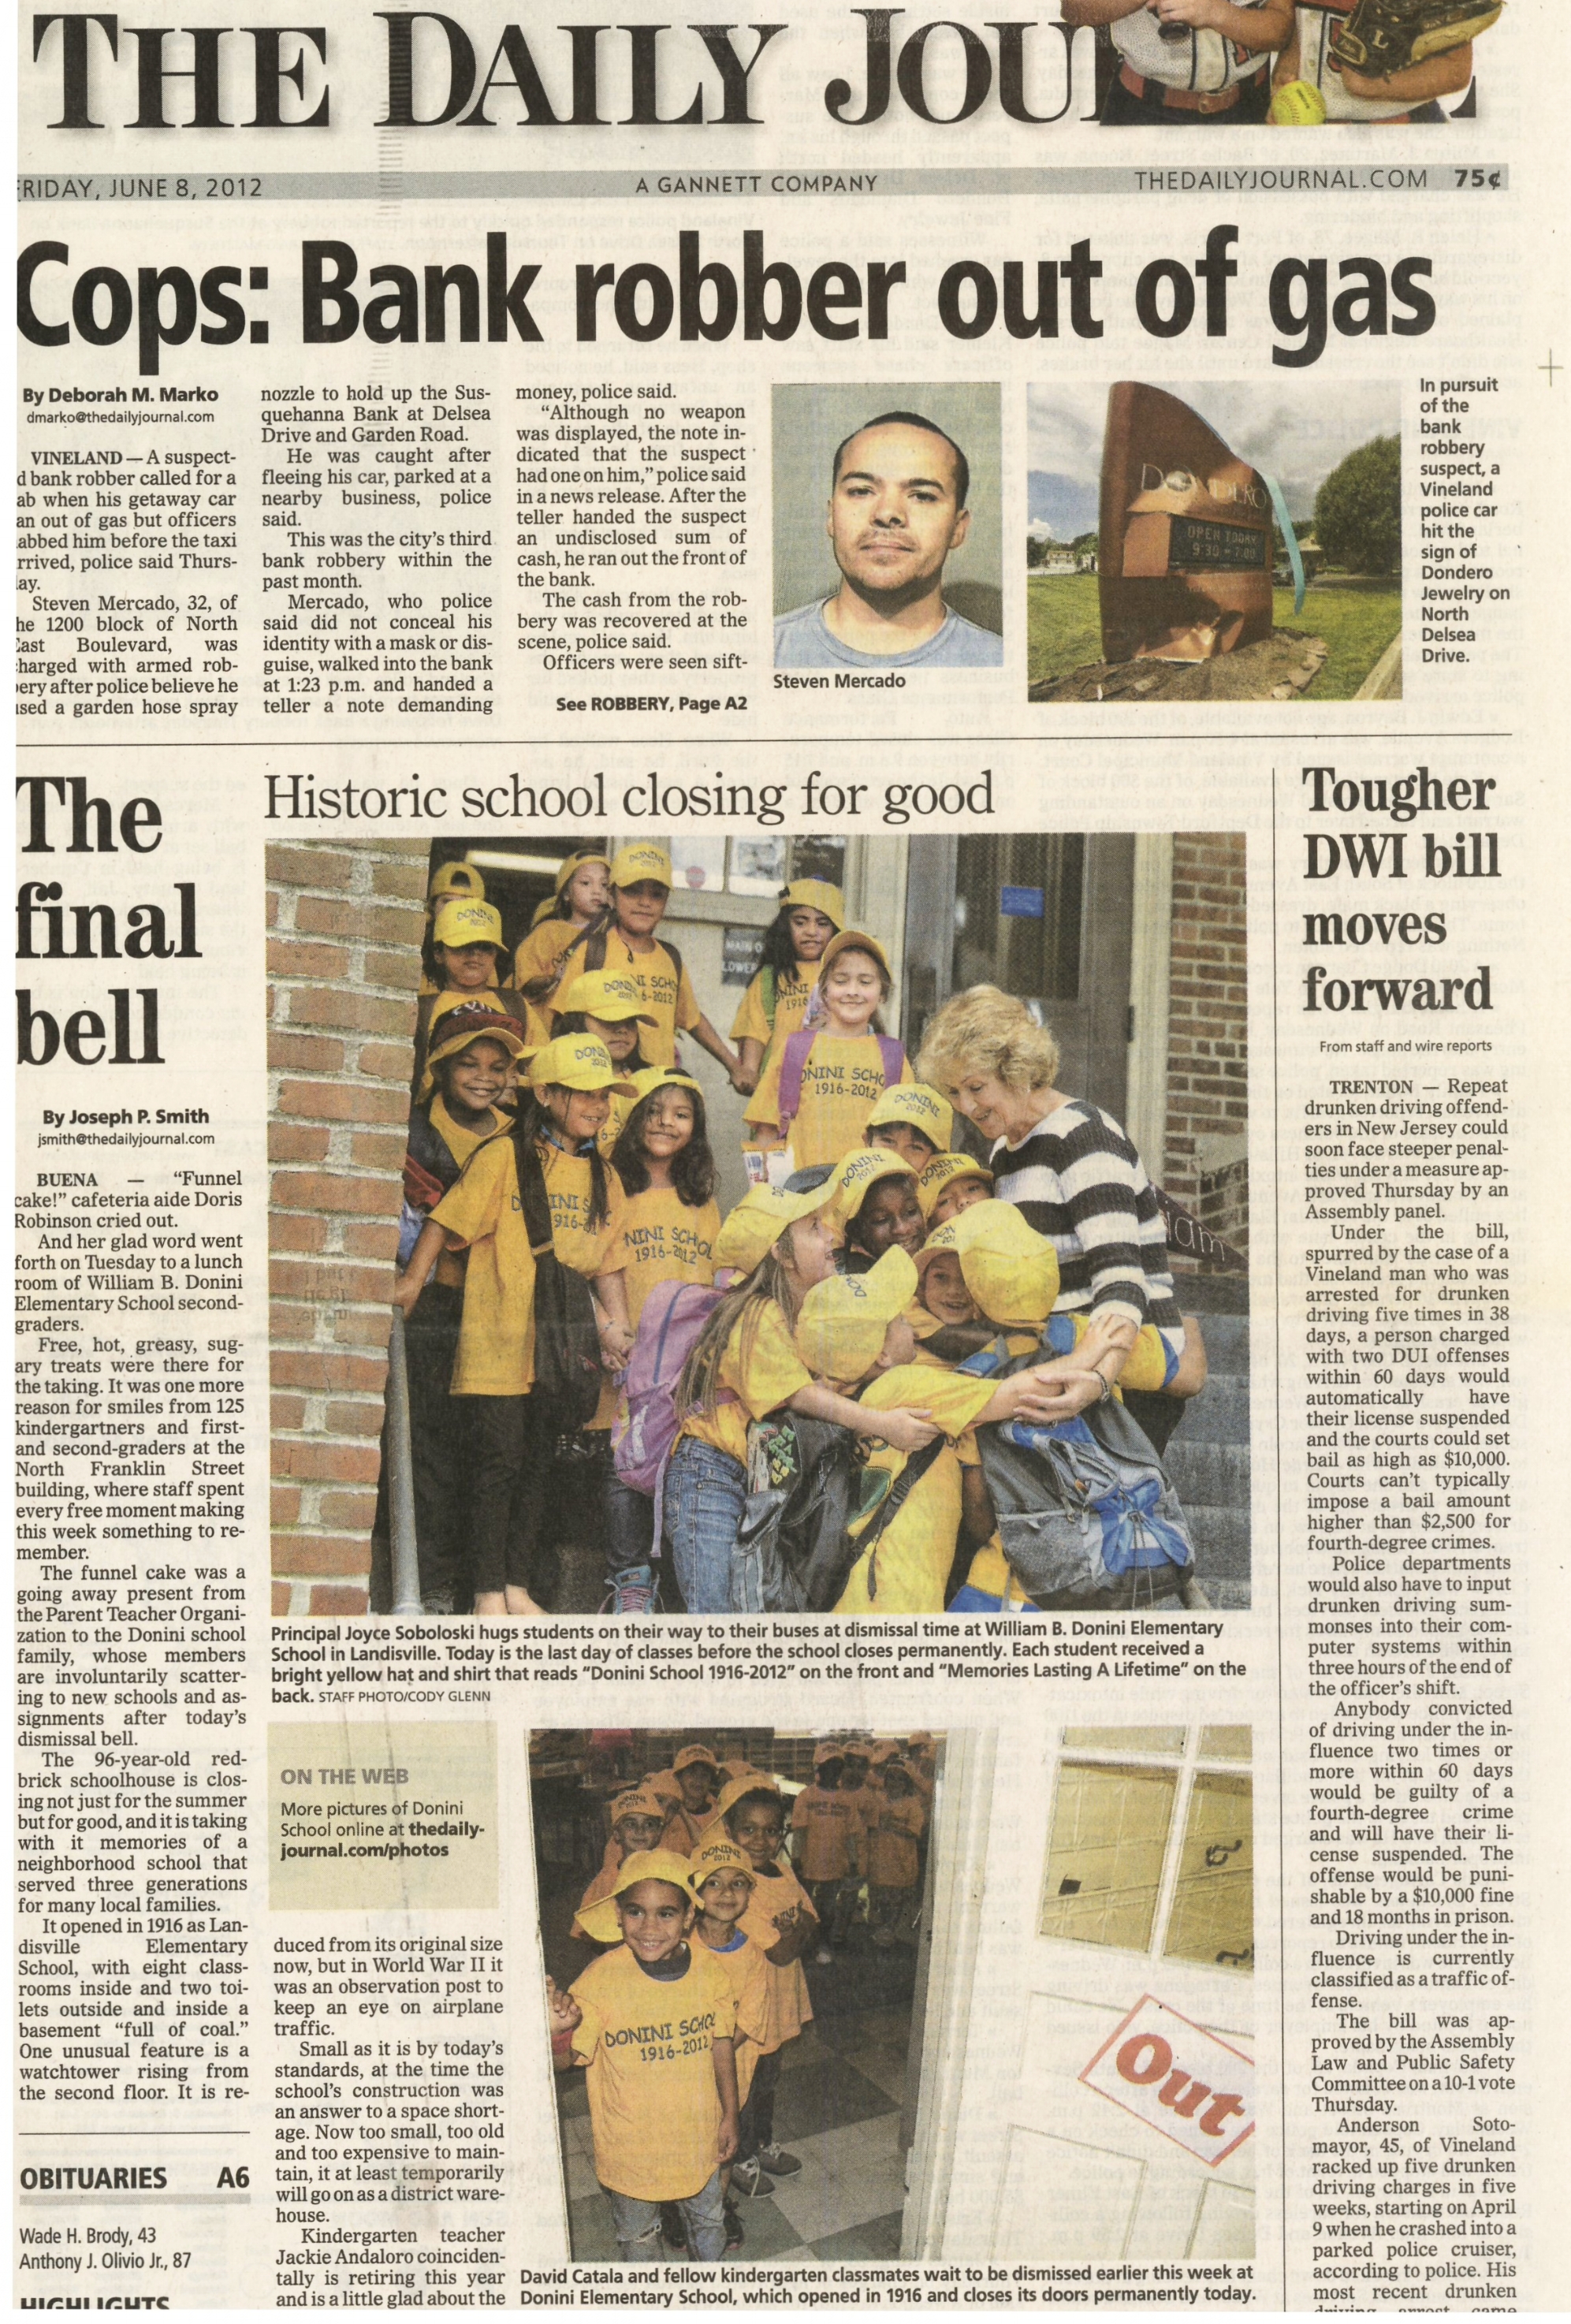  Donini Elementary School closes its doors after 96 years of youth education in Buena June 8 2012 /  The Daily Journal   